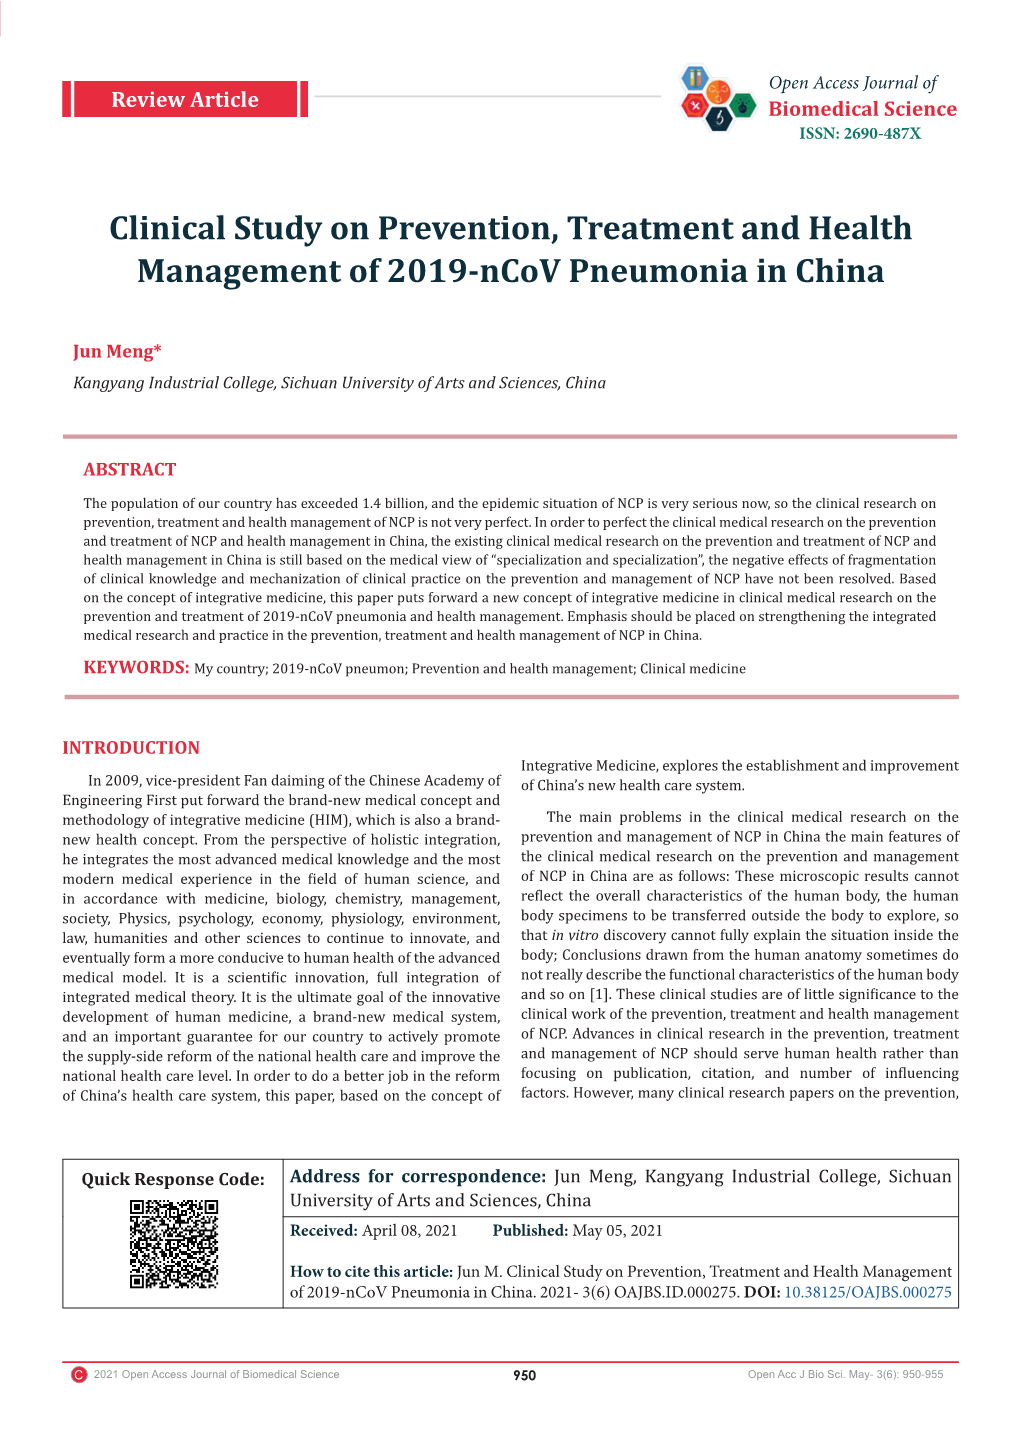 Clinical Study on Prevention, Treatment and Health Management of 2019-Ncov Pneumonia in China